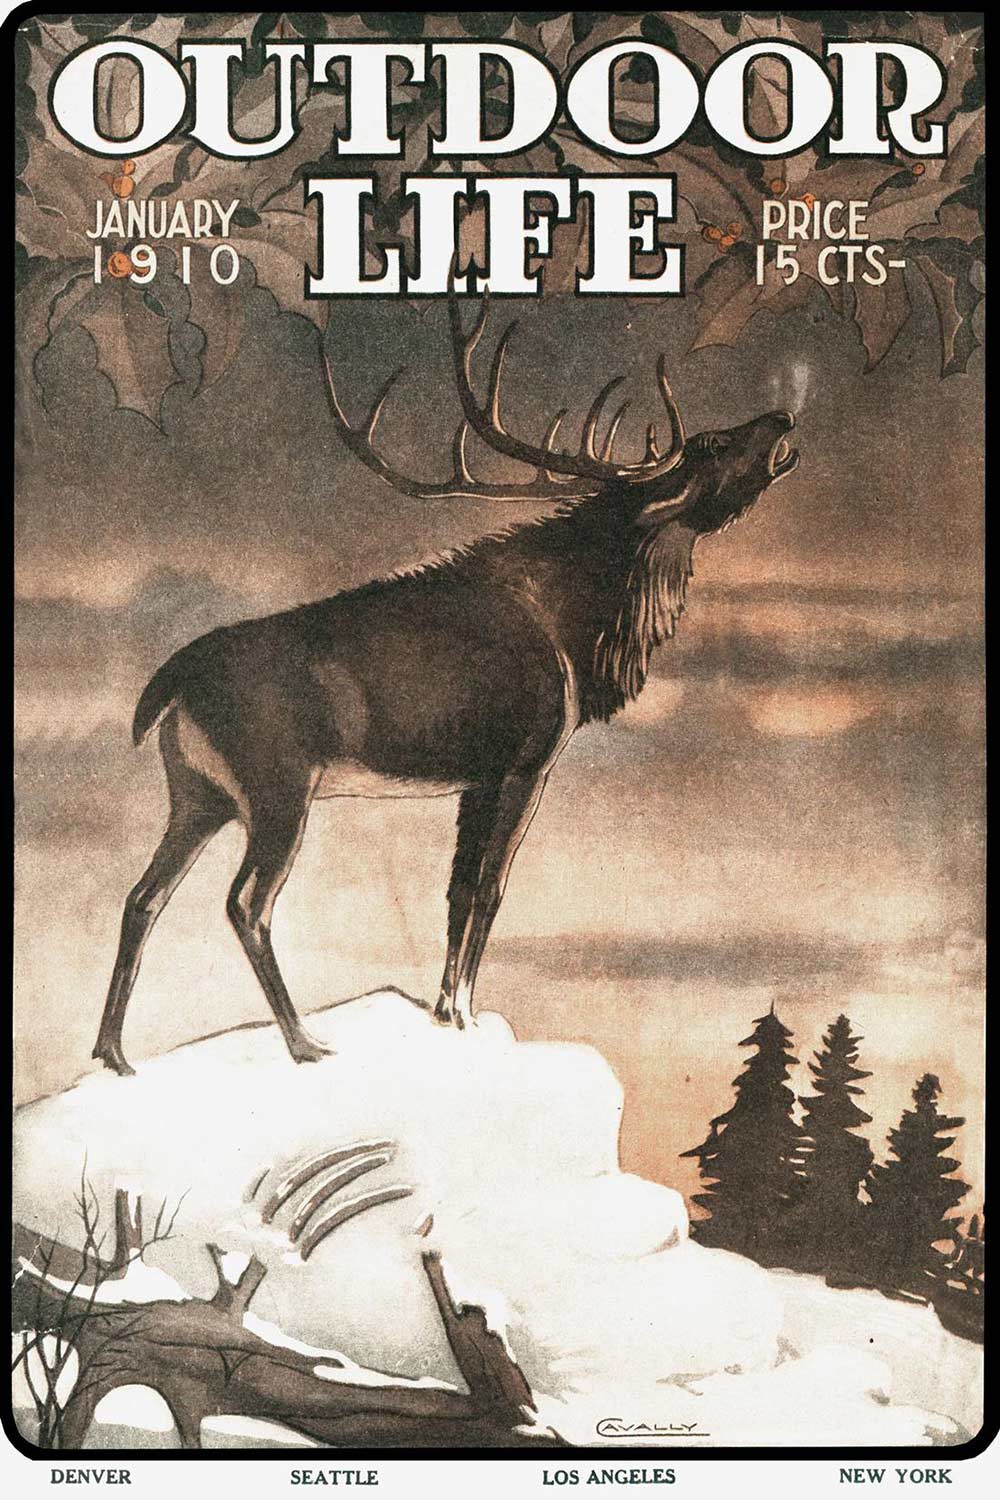 January 1910 Cover of Outdoor Life